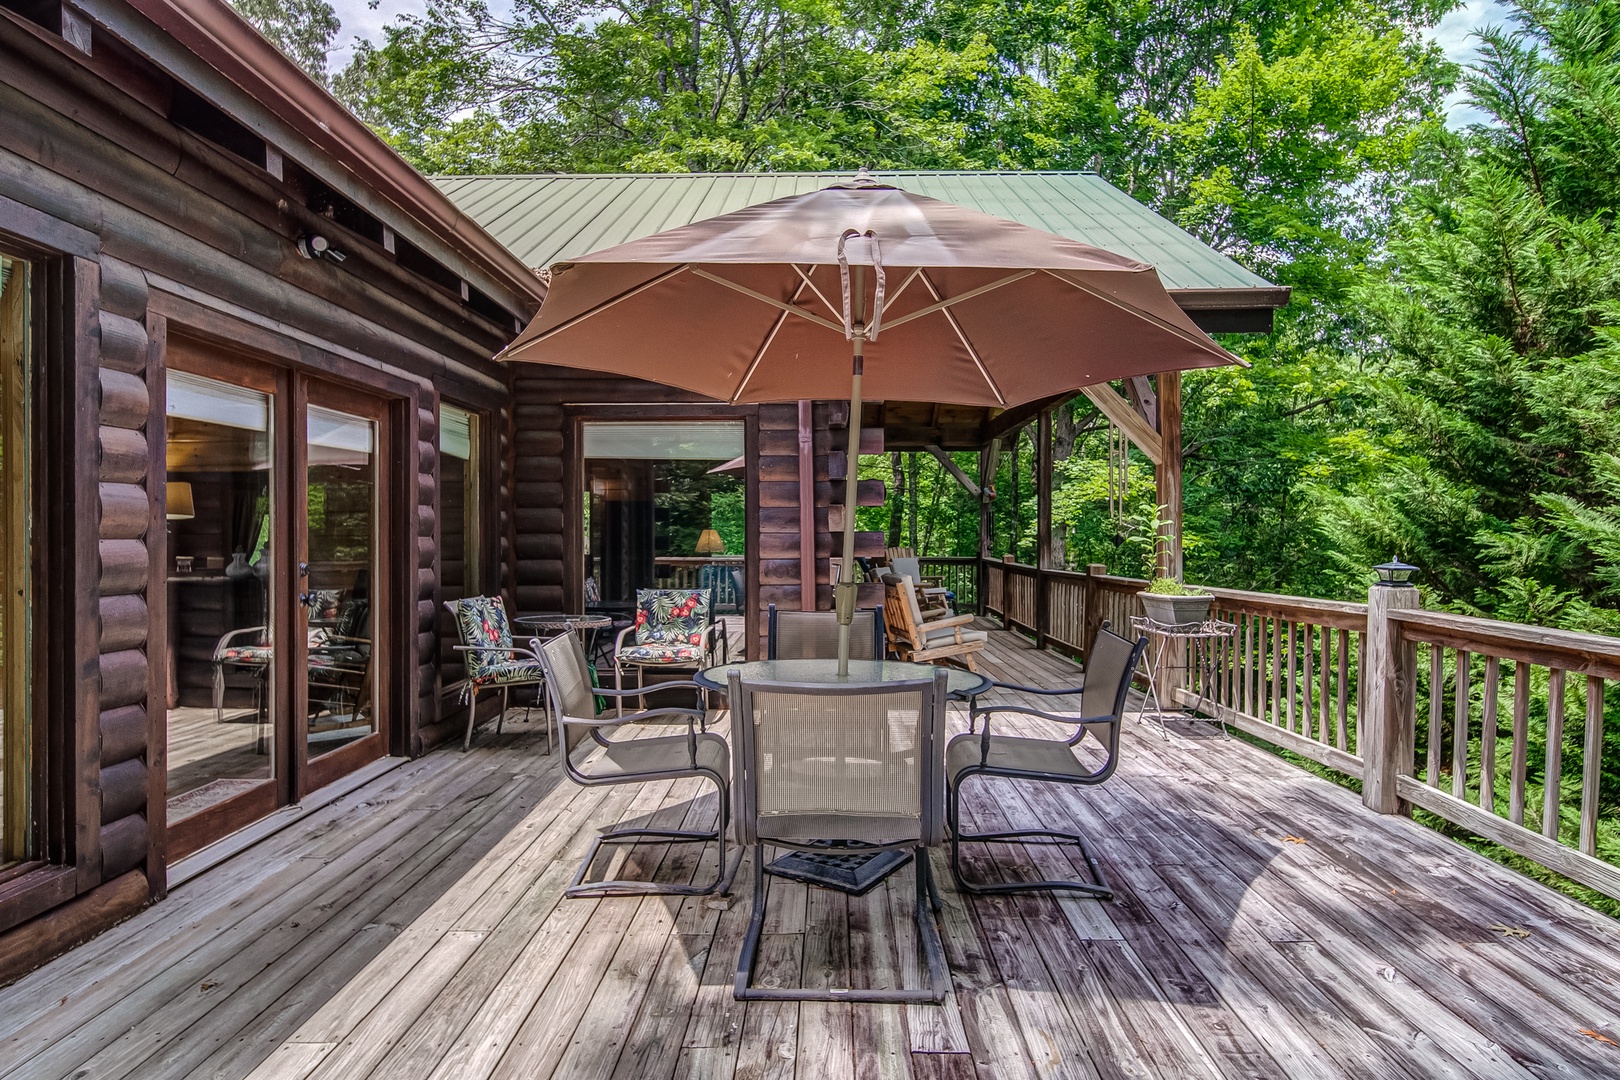 This home offers several spaces for dining & relaxing in the great outdoors